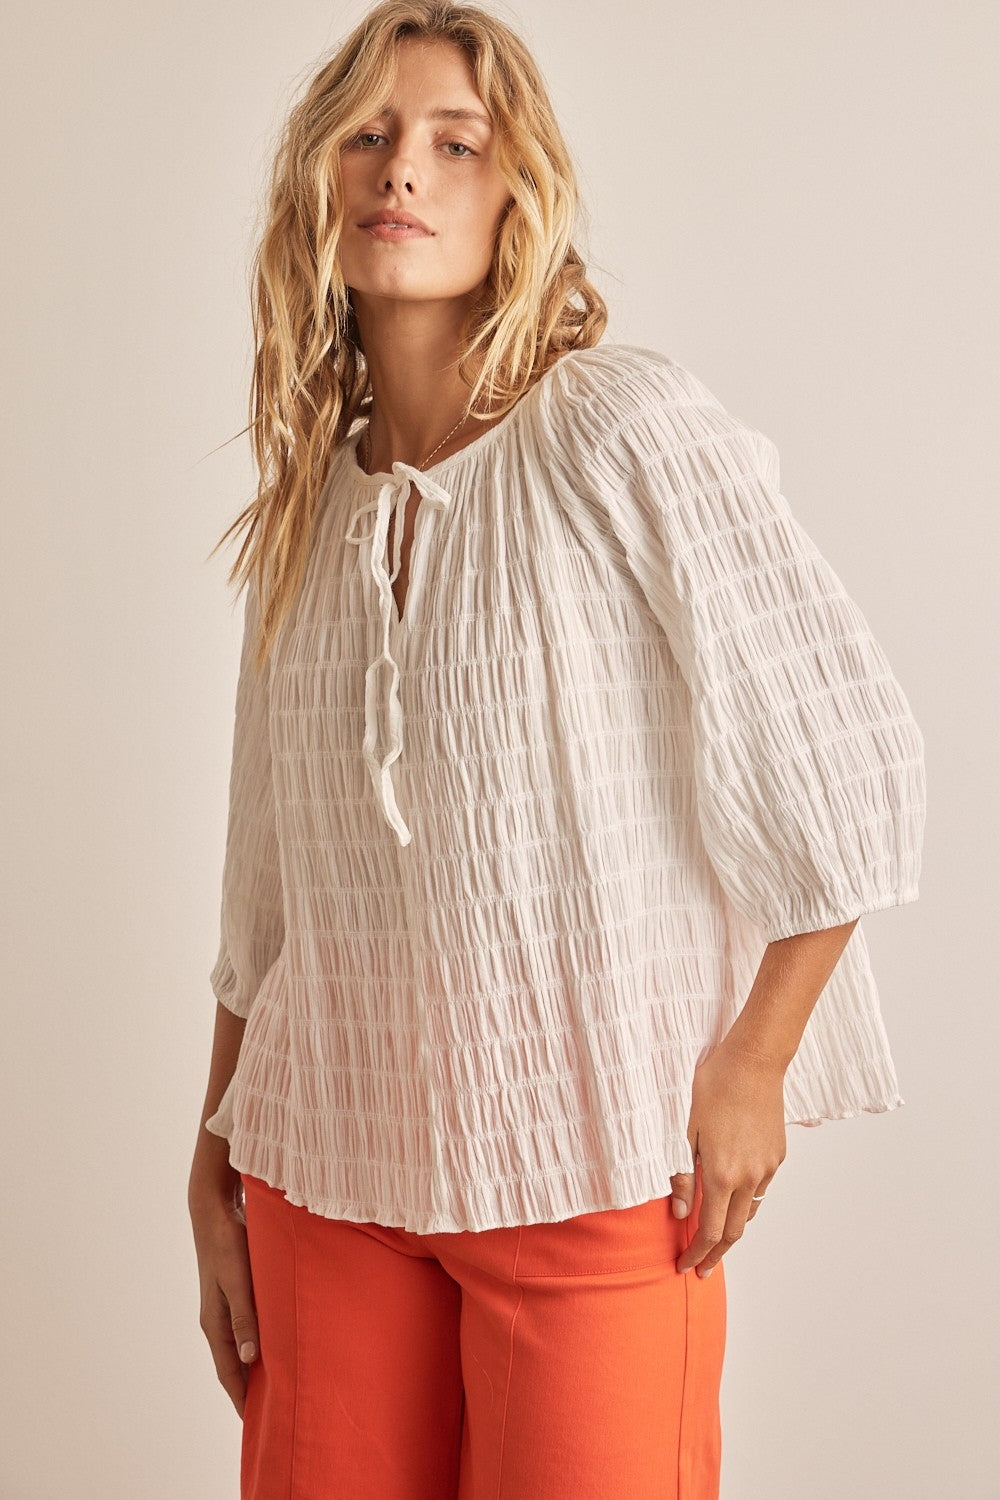 Textured Tie Neck Blouse by InFebruary